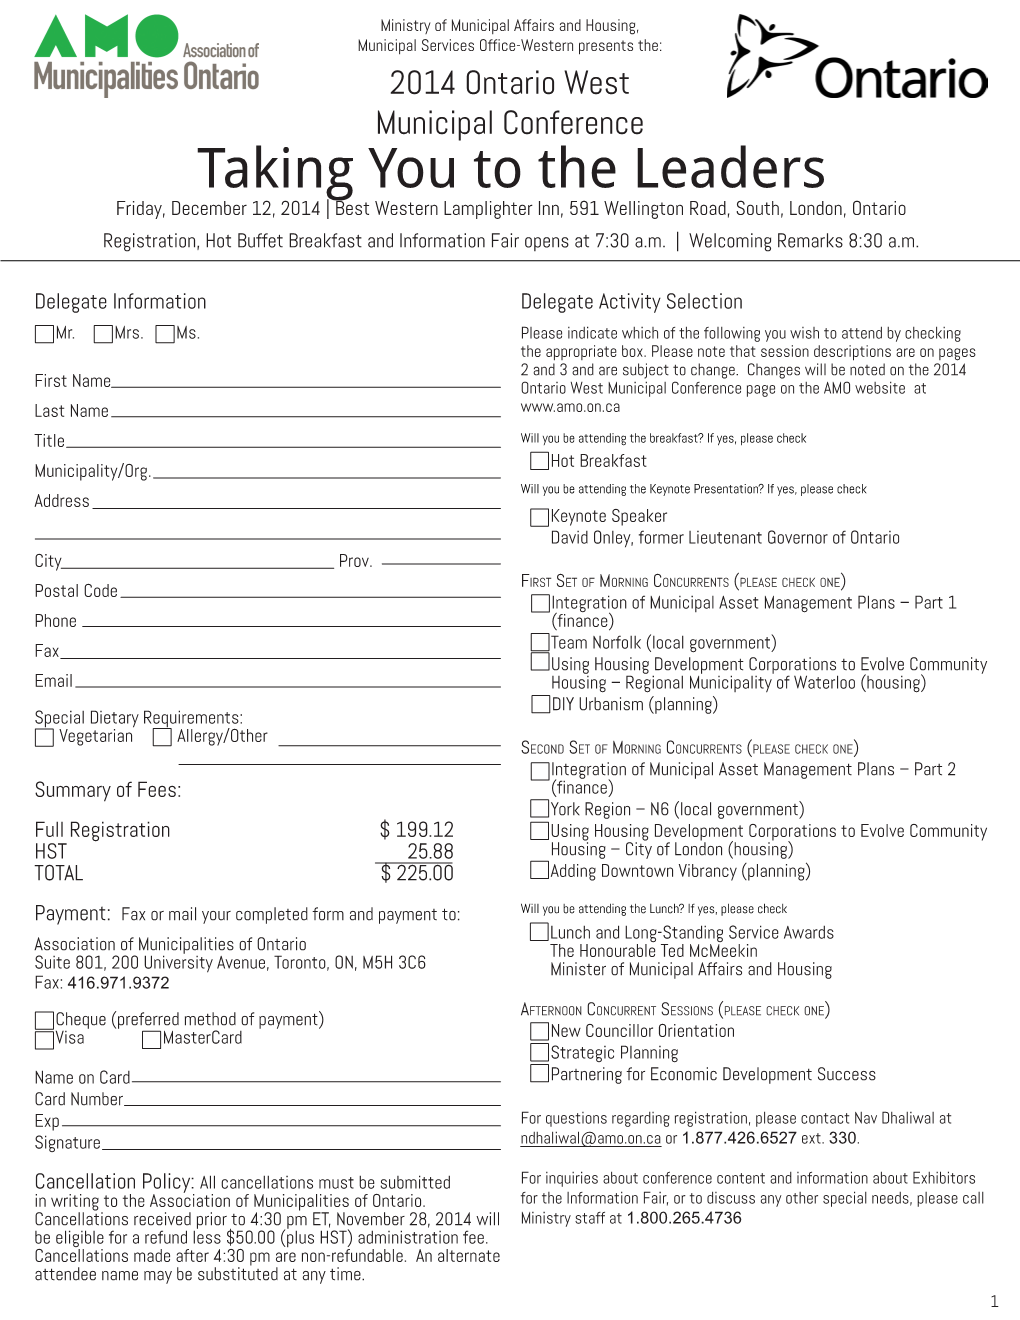 Taking You to the Leaders